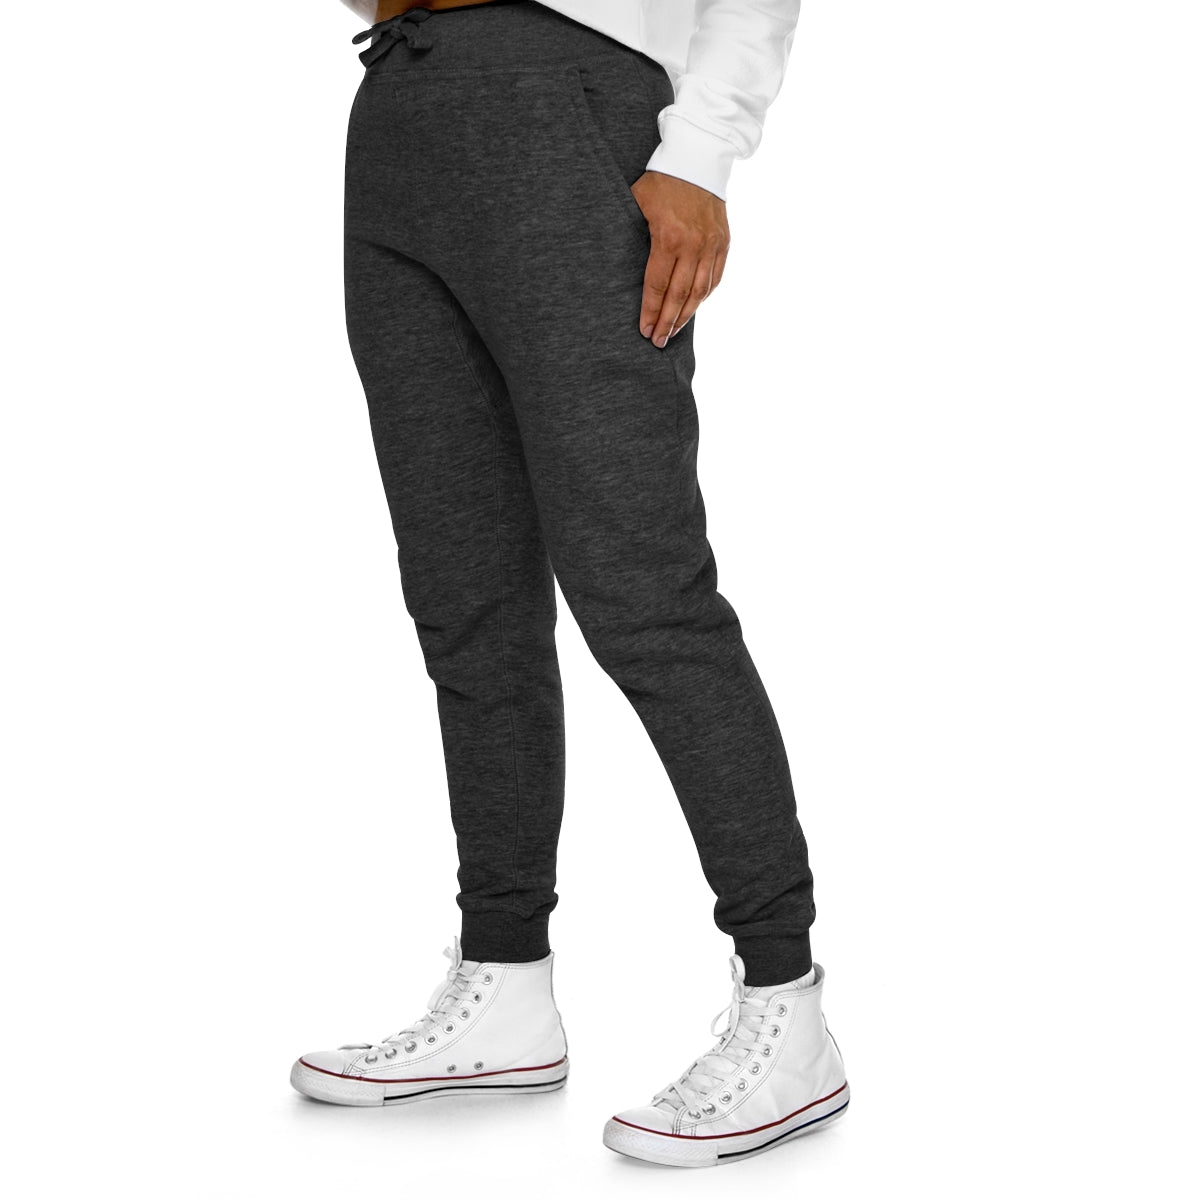 a woman wearing Good Vibes Premium Fleece Joggers and white sneakers.